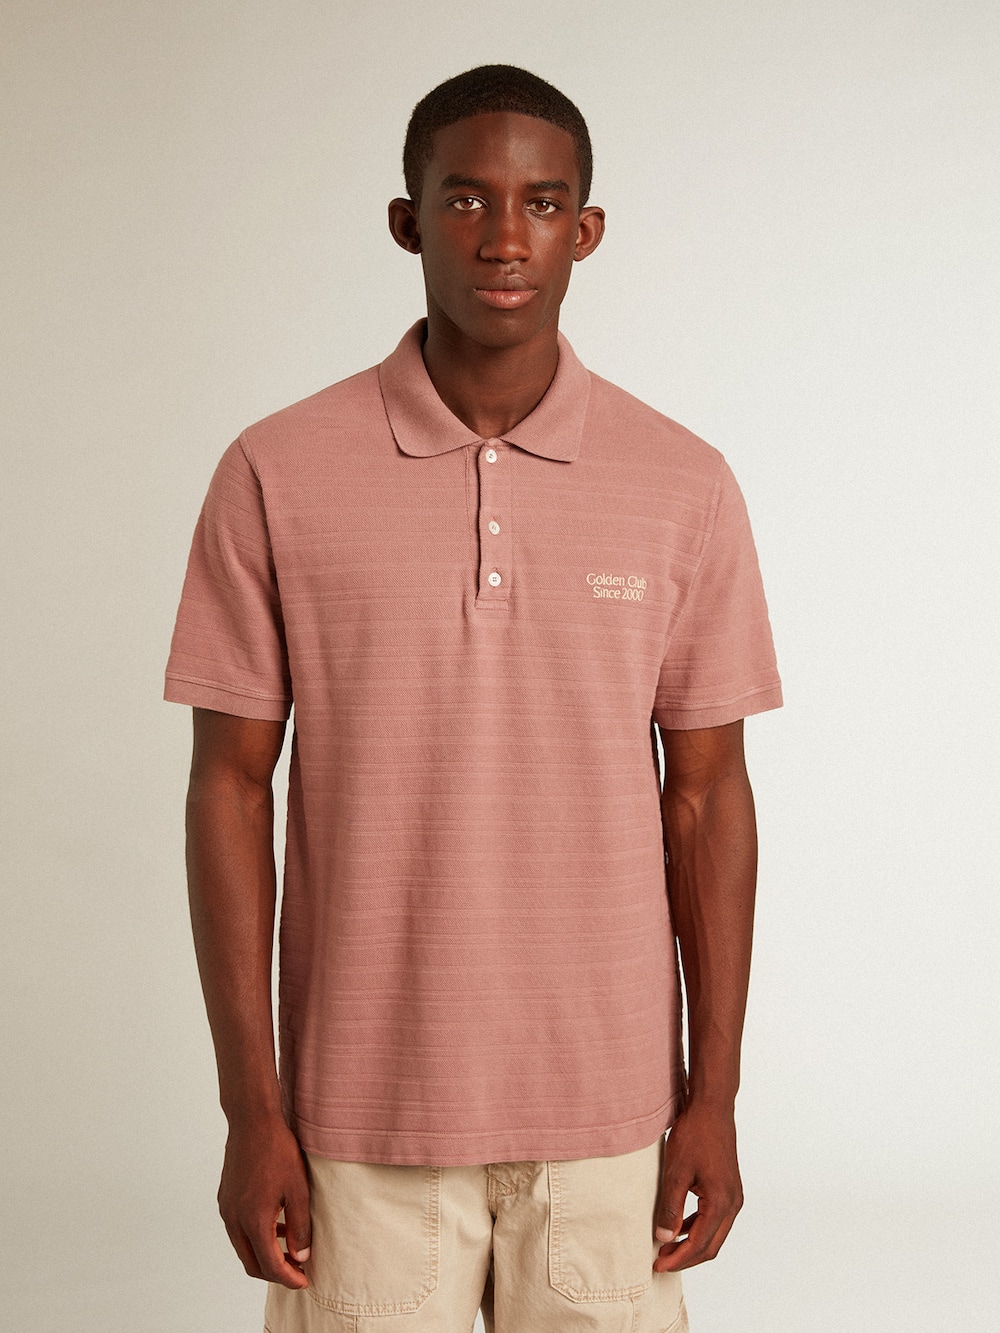 Golden Goose - Taupe pink-colored cotton piquet polo shirt in 